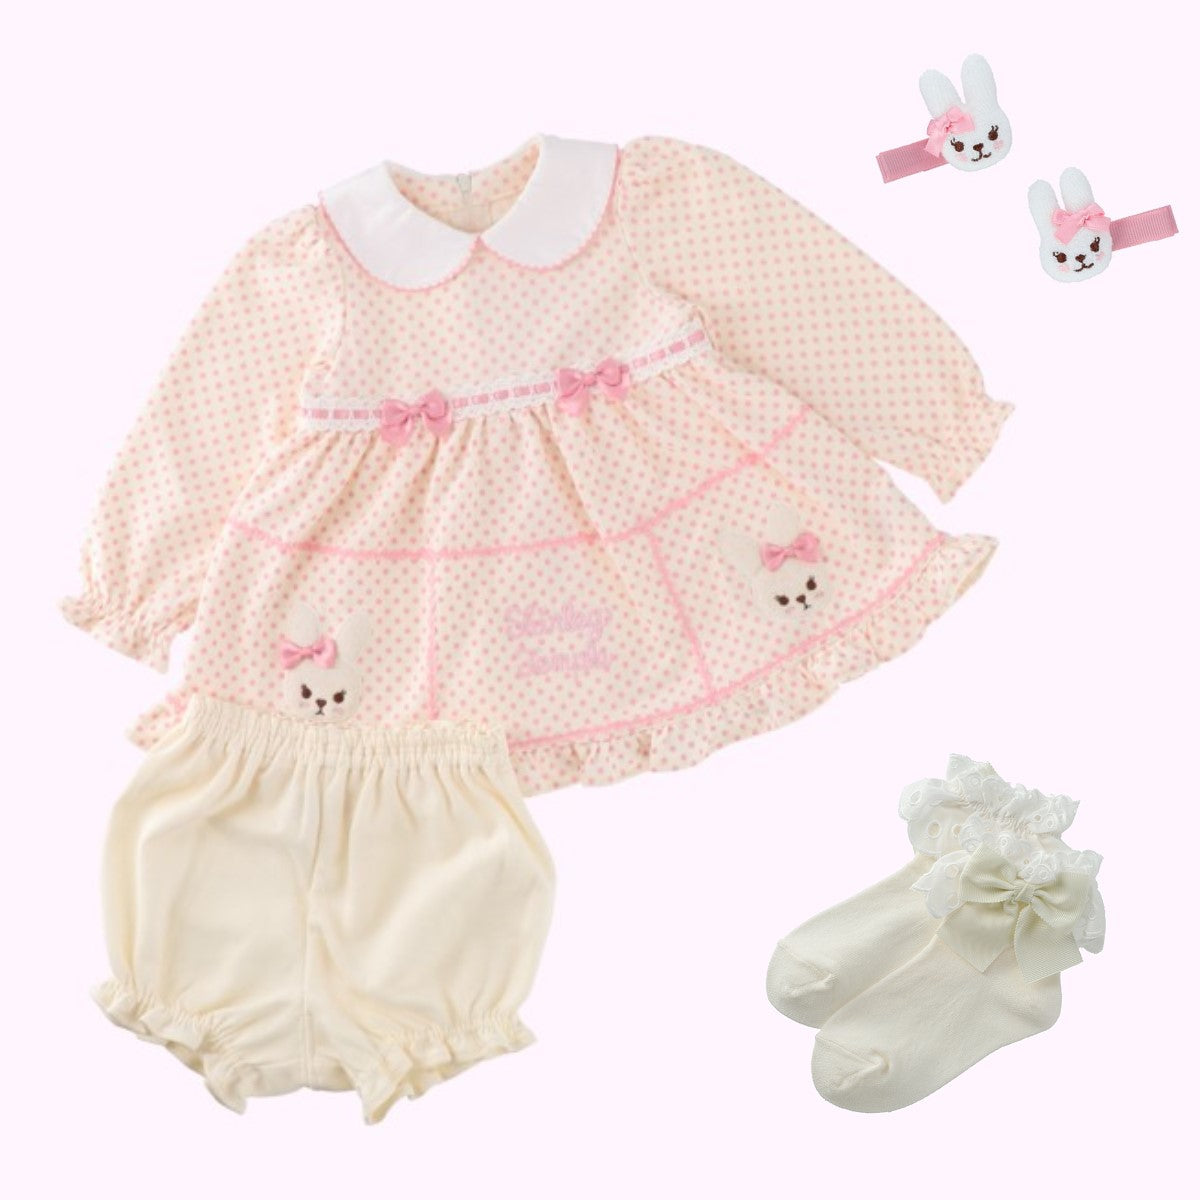 BABY GIFT – Shirley Temple Online Store